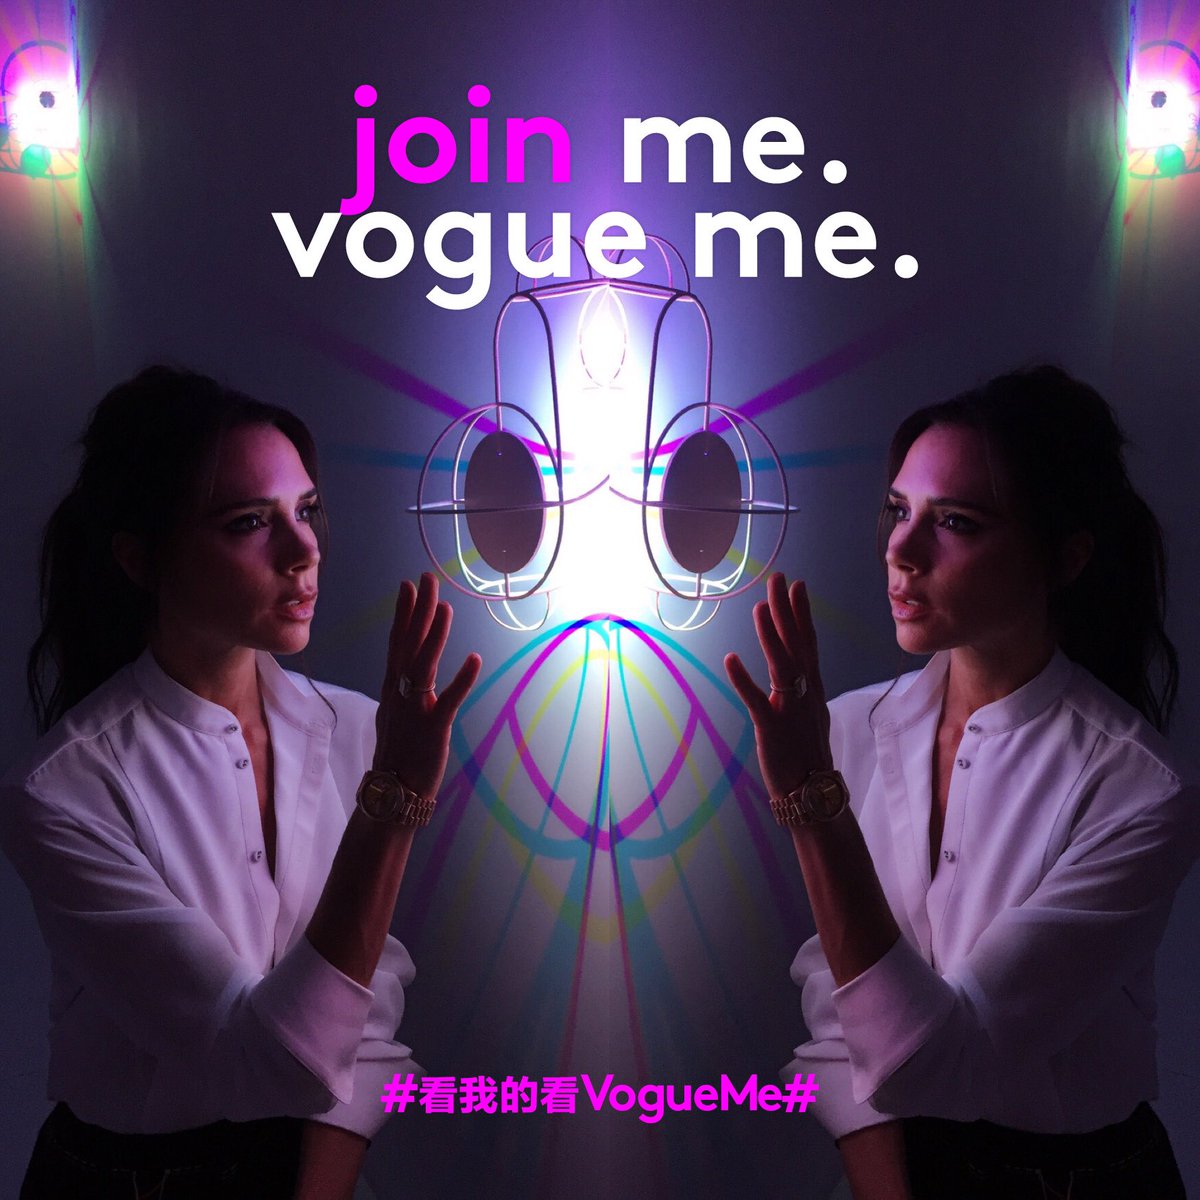 Congratulations to #VogueChina @angelica_cheung on her exciting new project! X vb #voguemecampaign https://t.co/wmmb8jBKpz